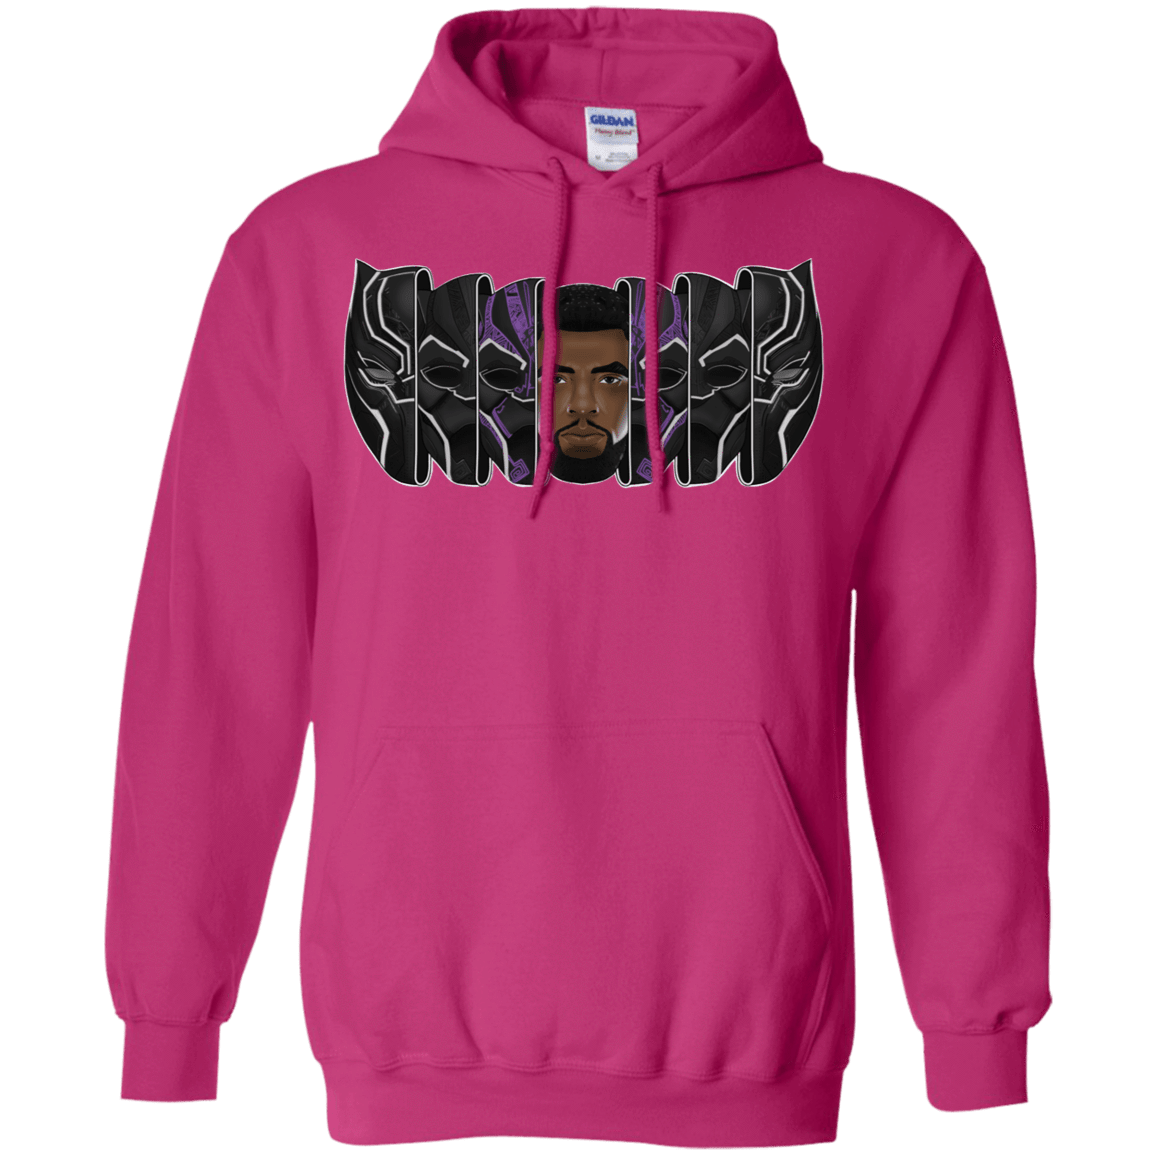 Sweatshirts Heliconia / S Black Panther Mask Pullover Hoodie